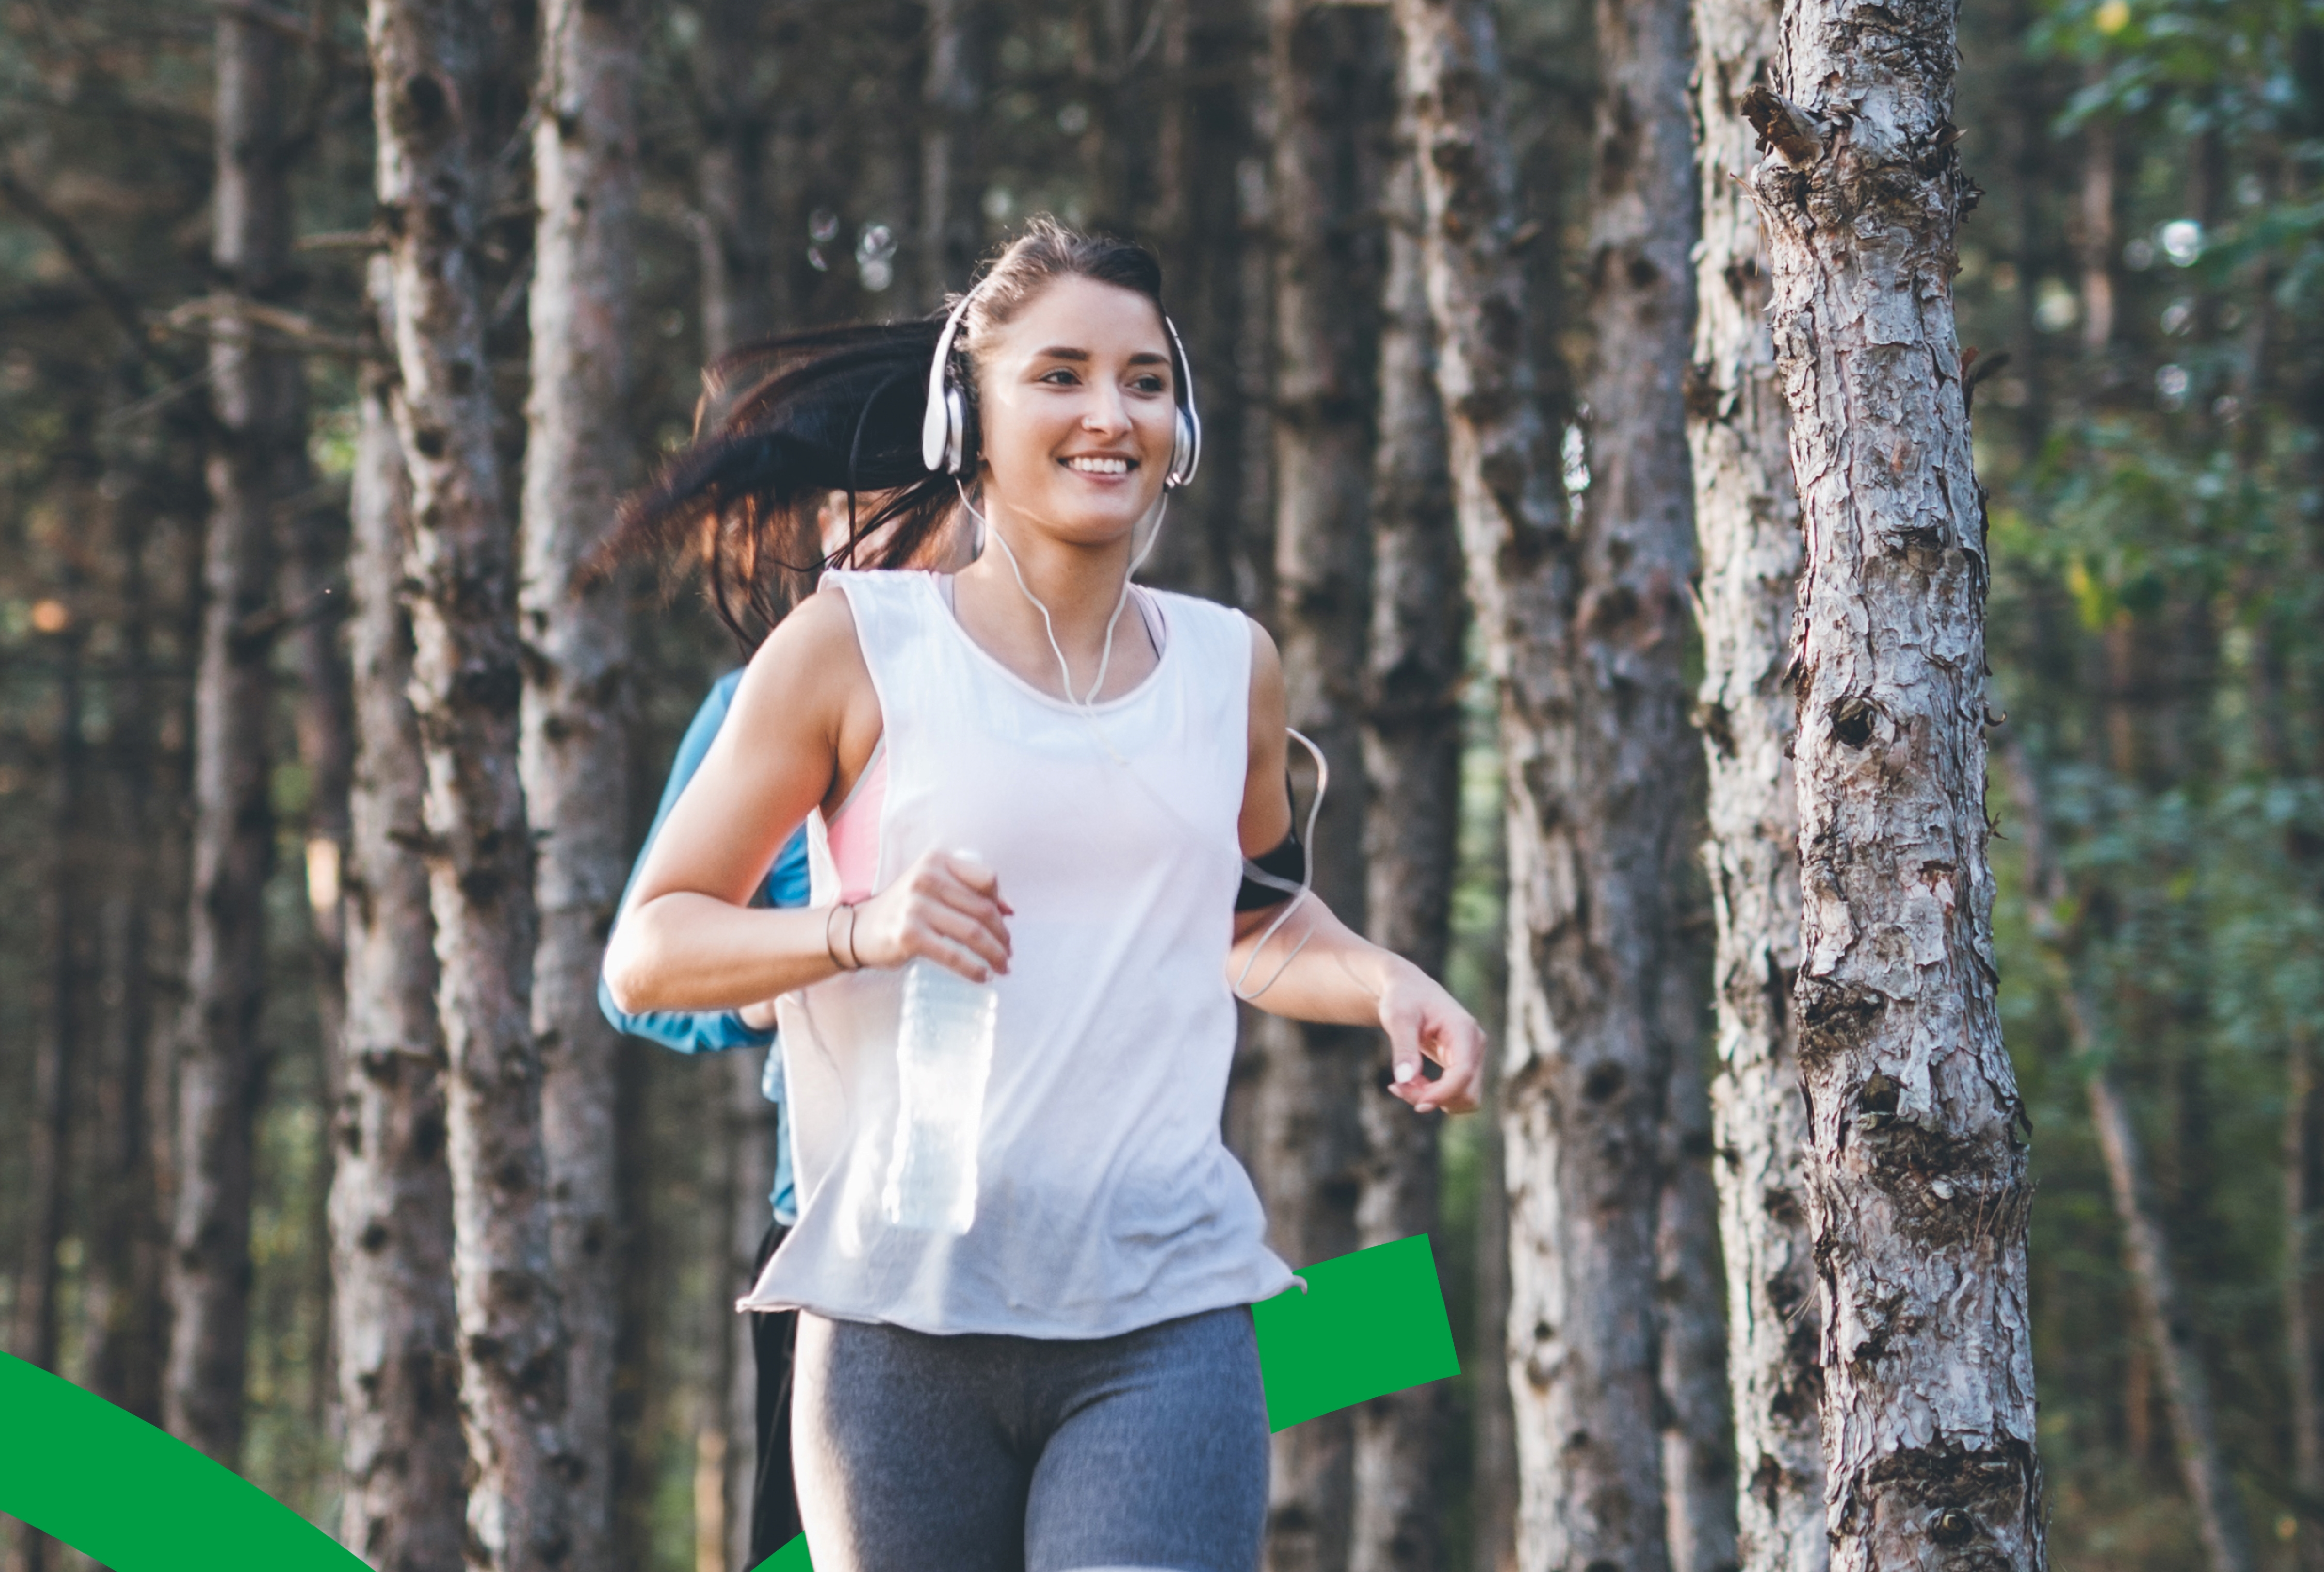 Woman running in forest with headphones